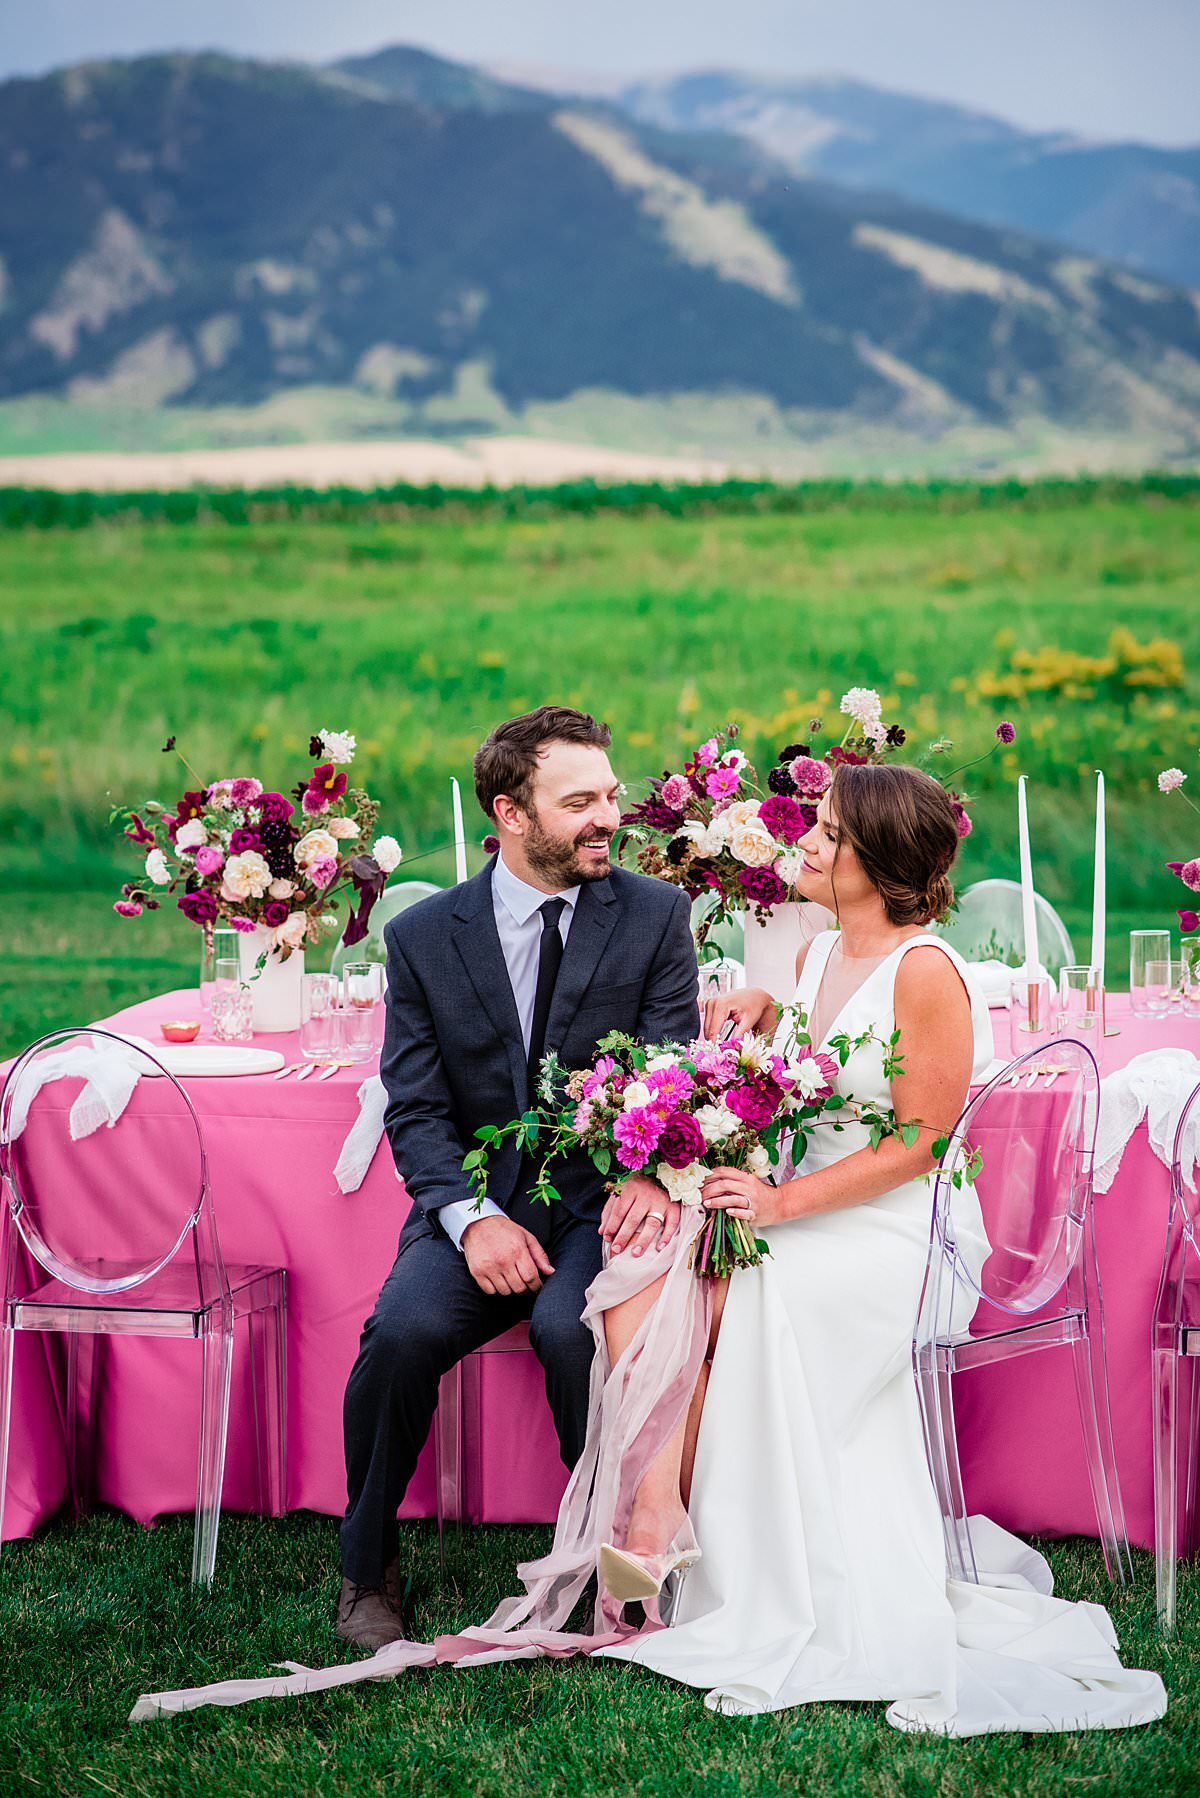 Hot pink and burgundy wedding designs with contemporary acrylic chairs outdoors in a field with Montana mountains  behind thee couple who are sitting together at the table